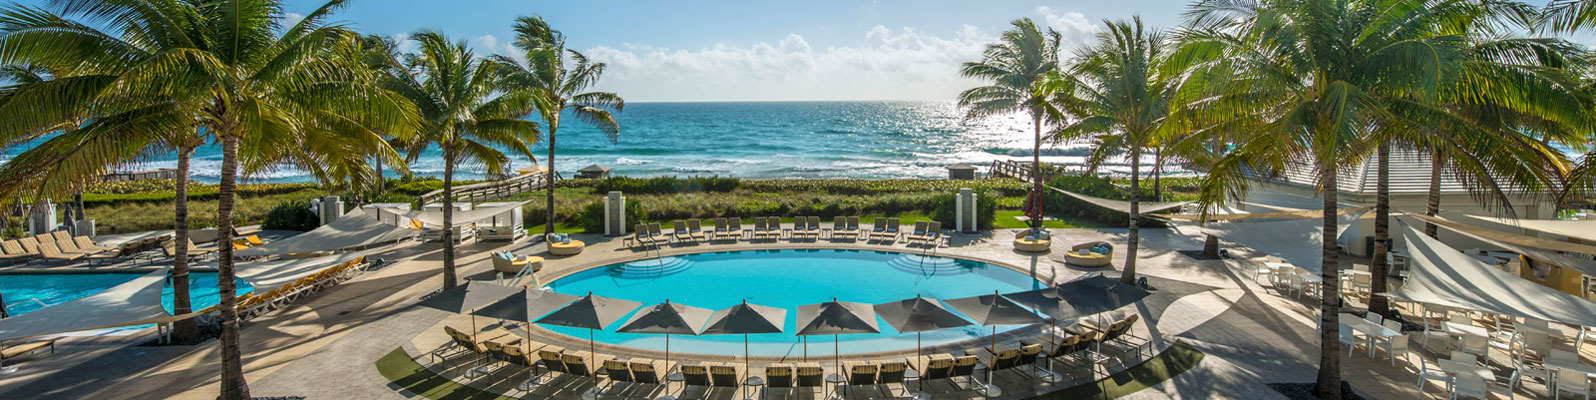 Stay at the Luxurious Boca Raton Resort & Club – Ft. Lauderdale, Florida